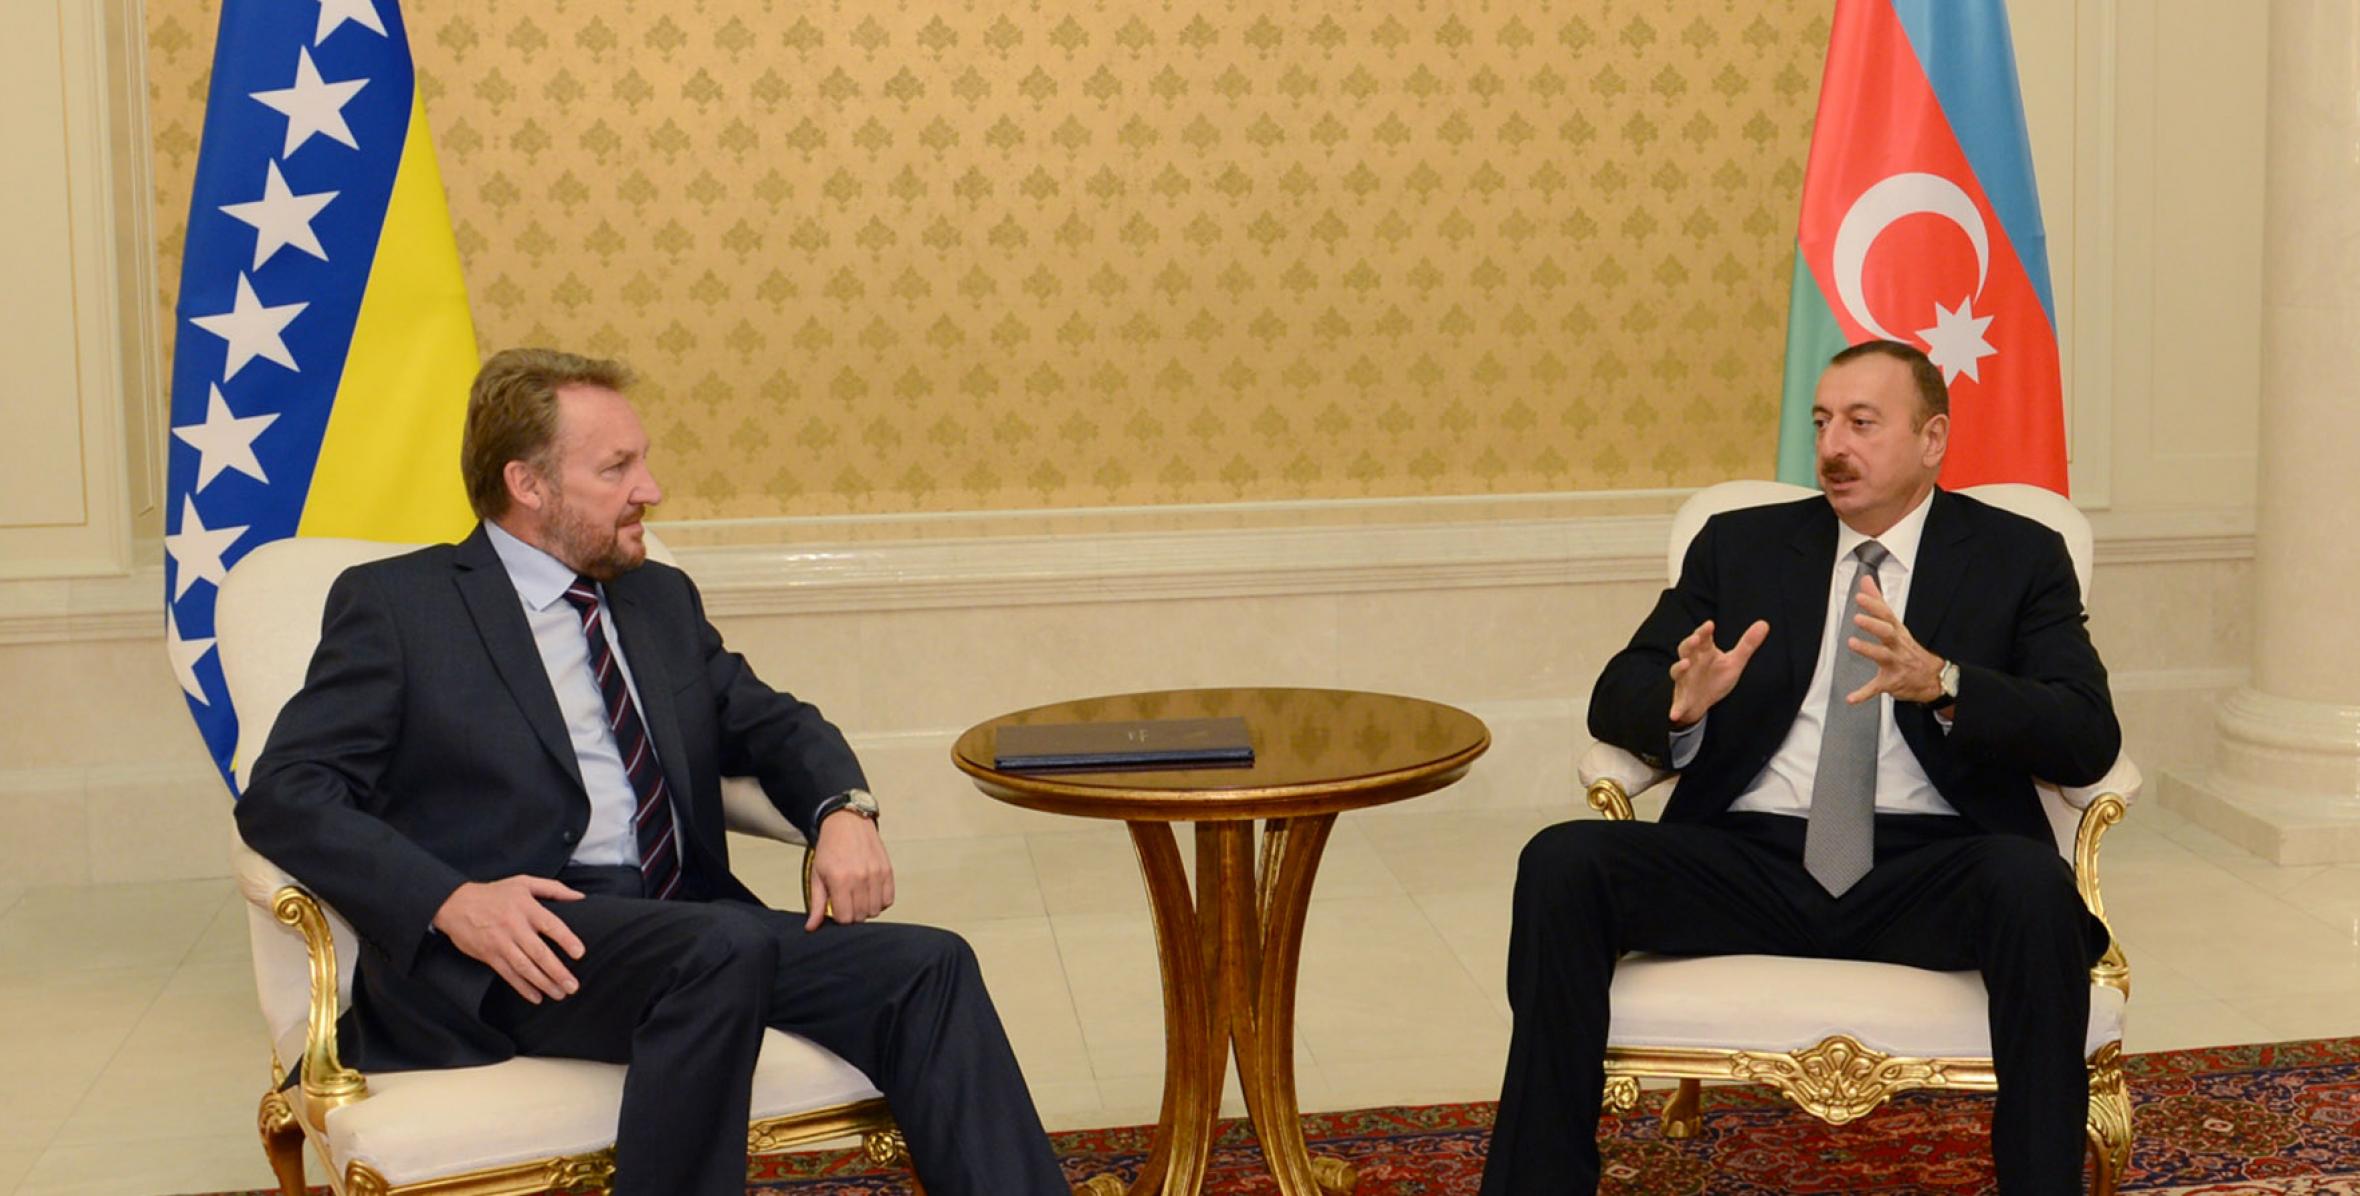 Ilham Aliyev and the Chairman of the Presidency of Bosnia and Herzegovina Bakir Izetbegović had a face-to-face meeting